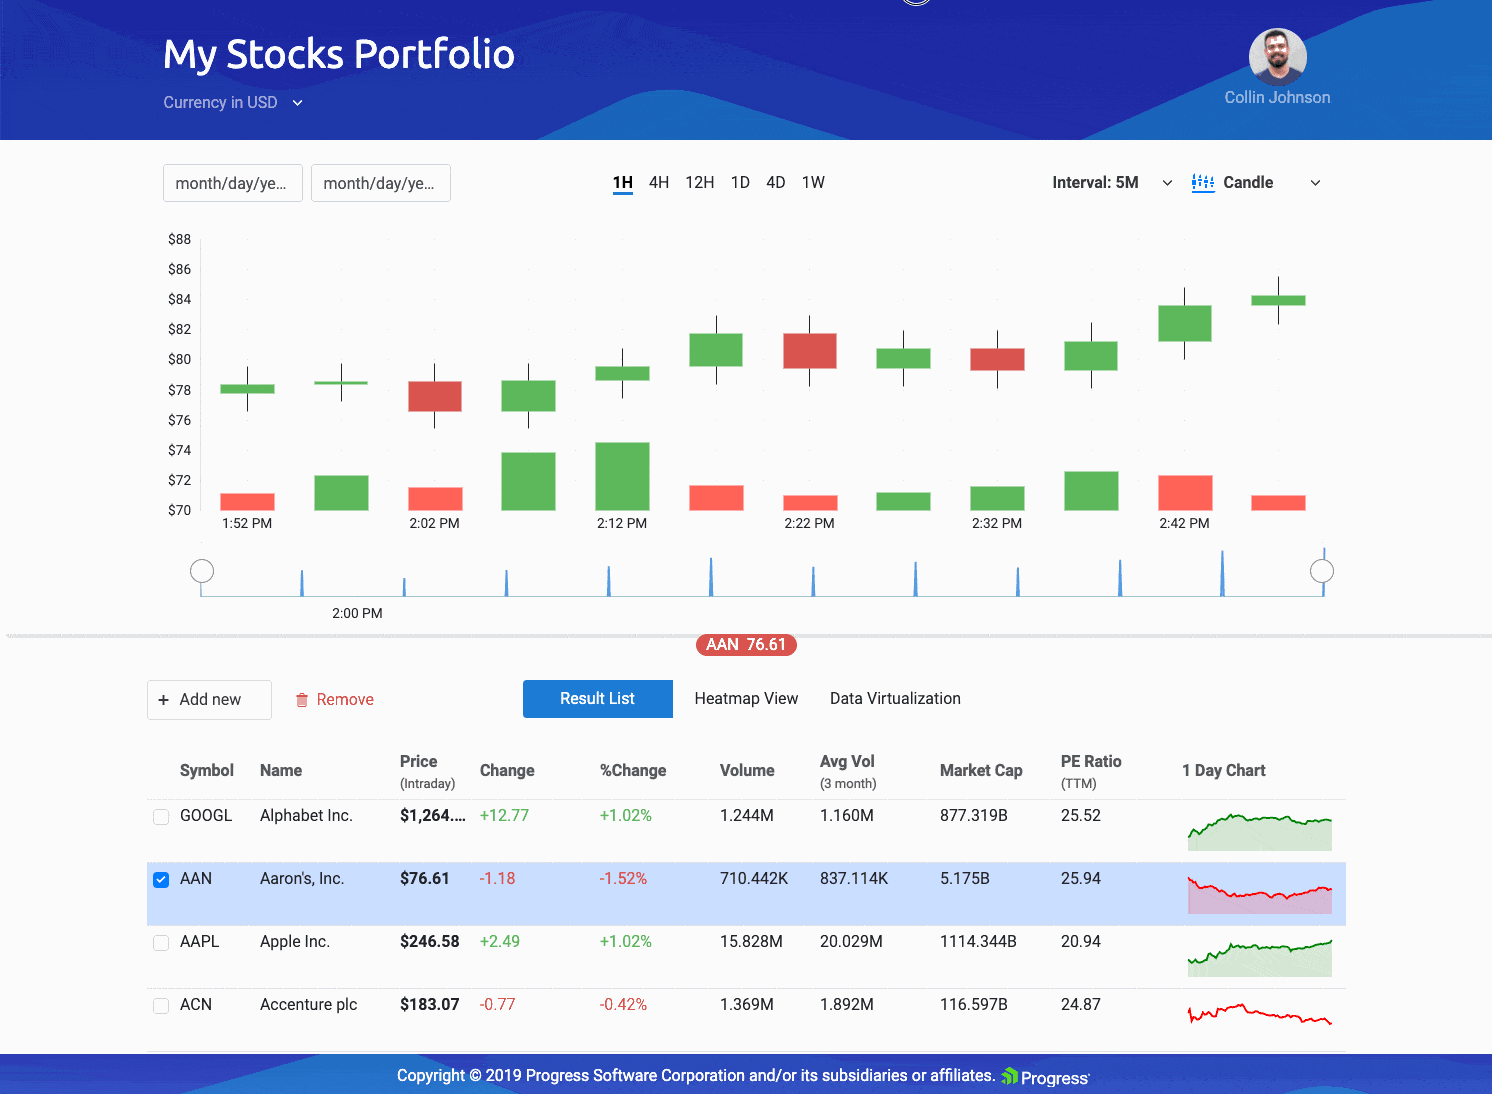 A gif walking through the different pages and features of the Financial Portfolio demo app using Kendo UI components